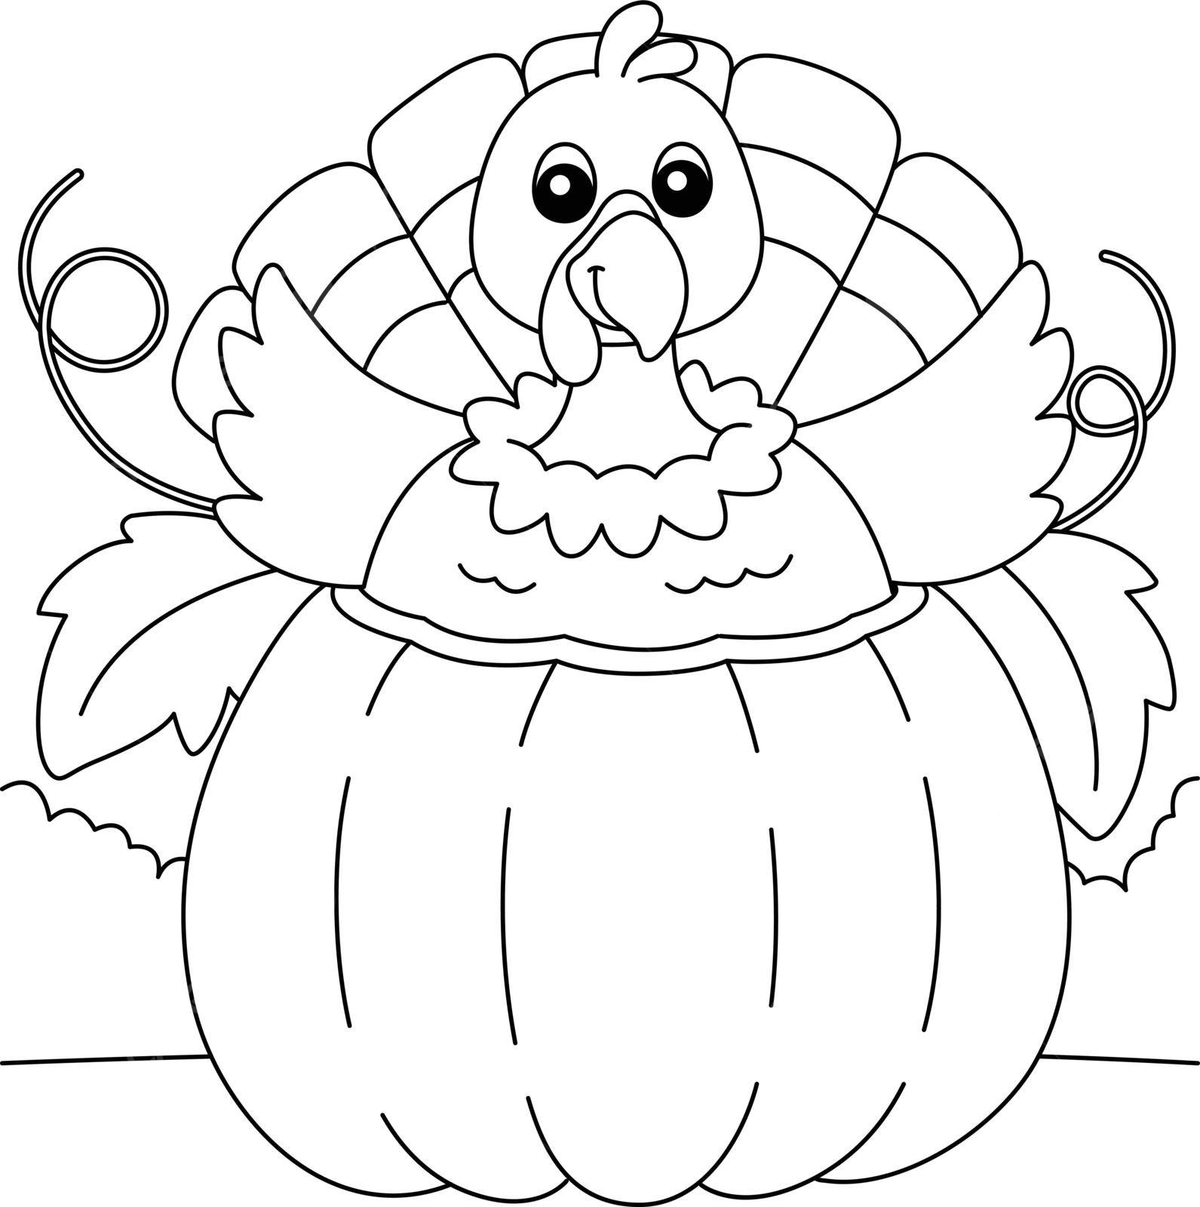 Thanksgiving turkey inside pumpkin coloring page design turkey color vector turkey drawing pumpkin drawing key drawing png and vector with transparent background for free download